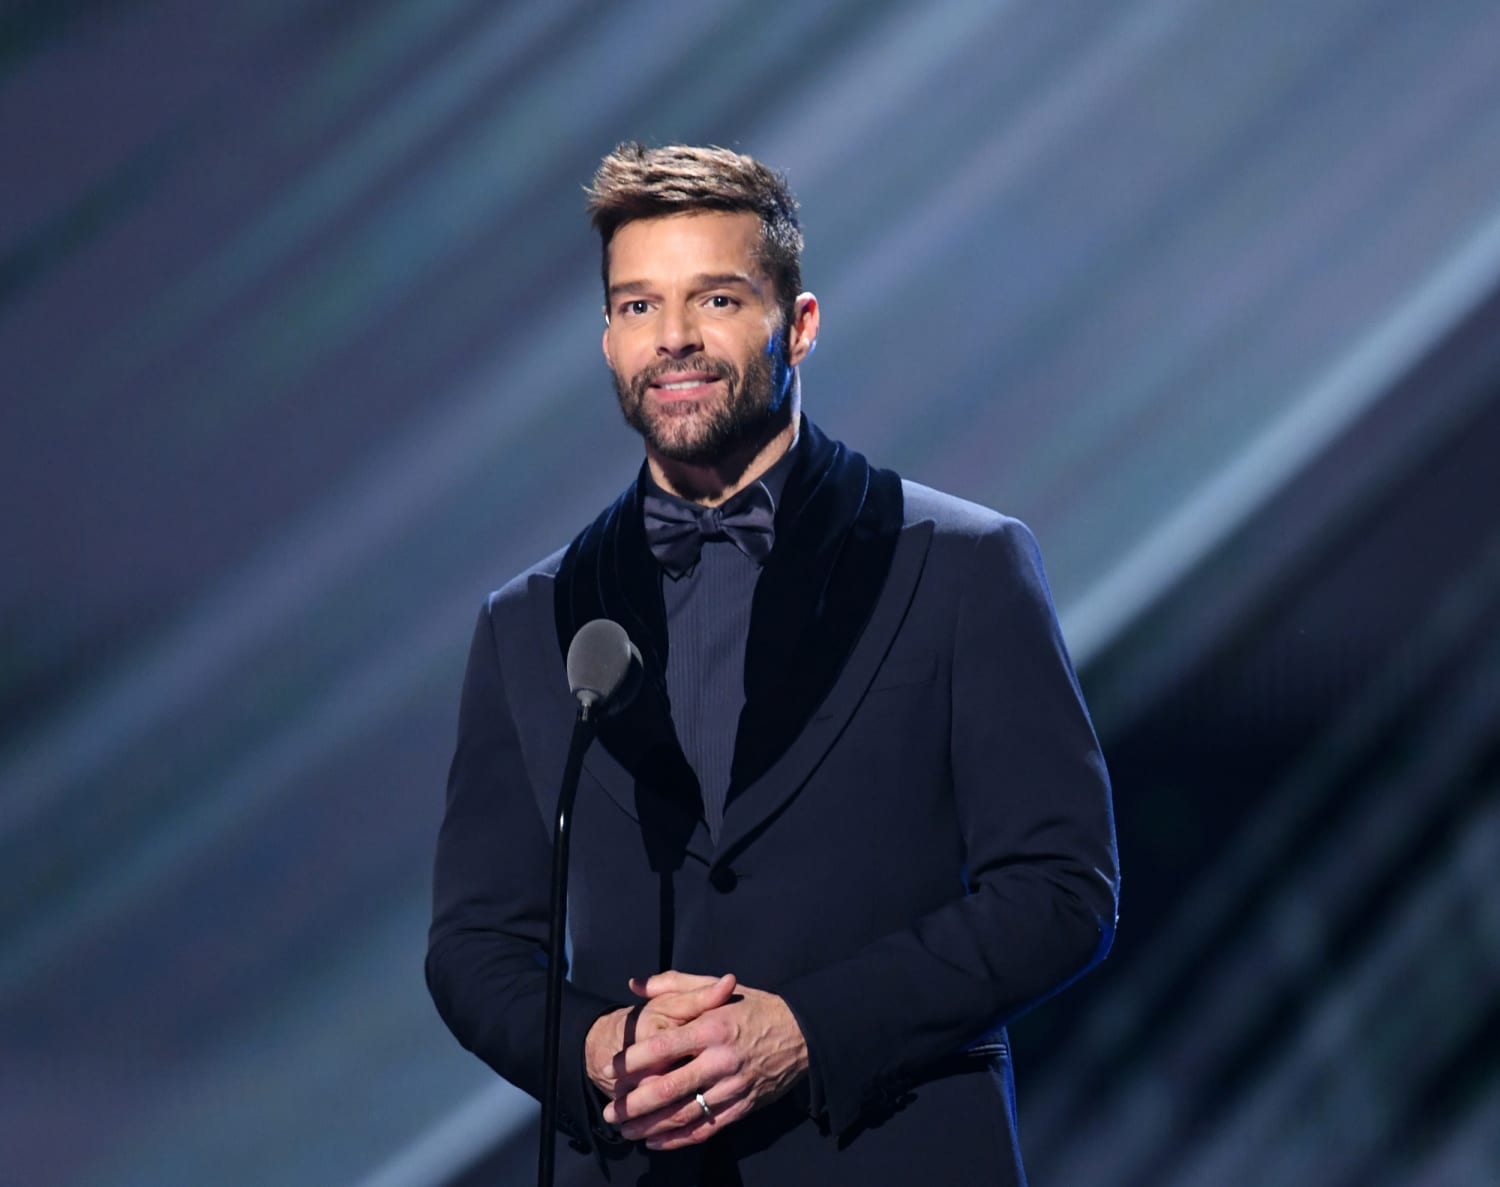 Ricky Martin on coming out as gay: 'I've been super happy ever since'